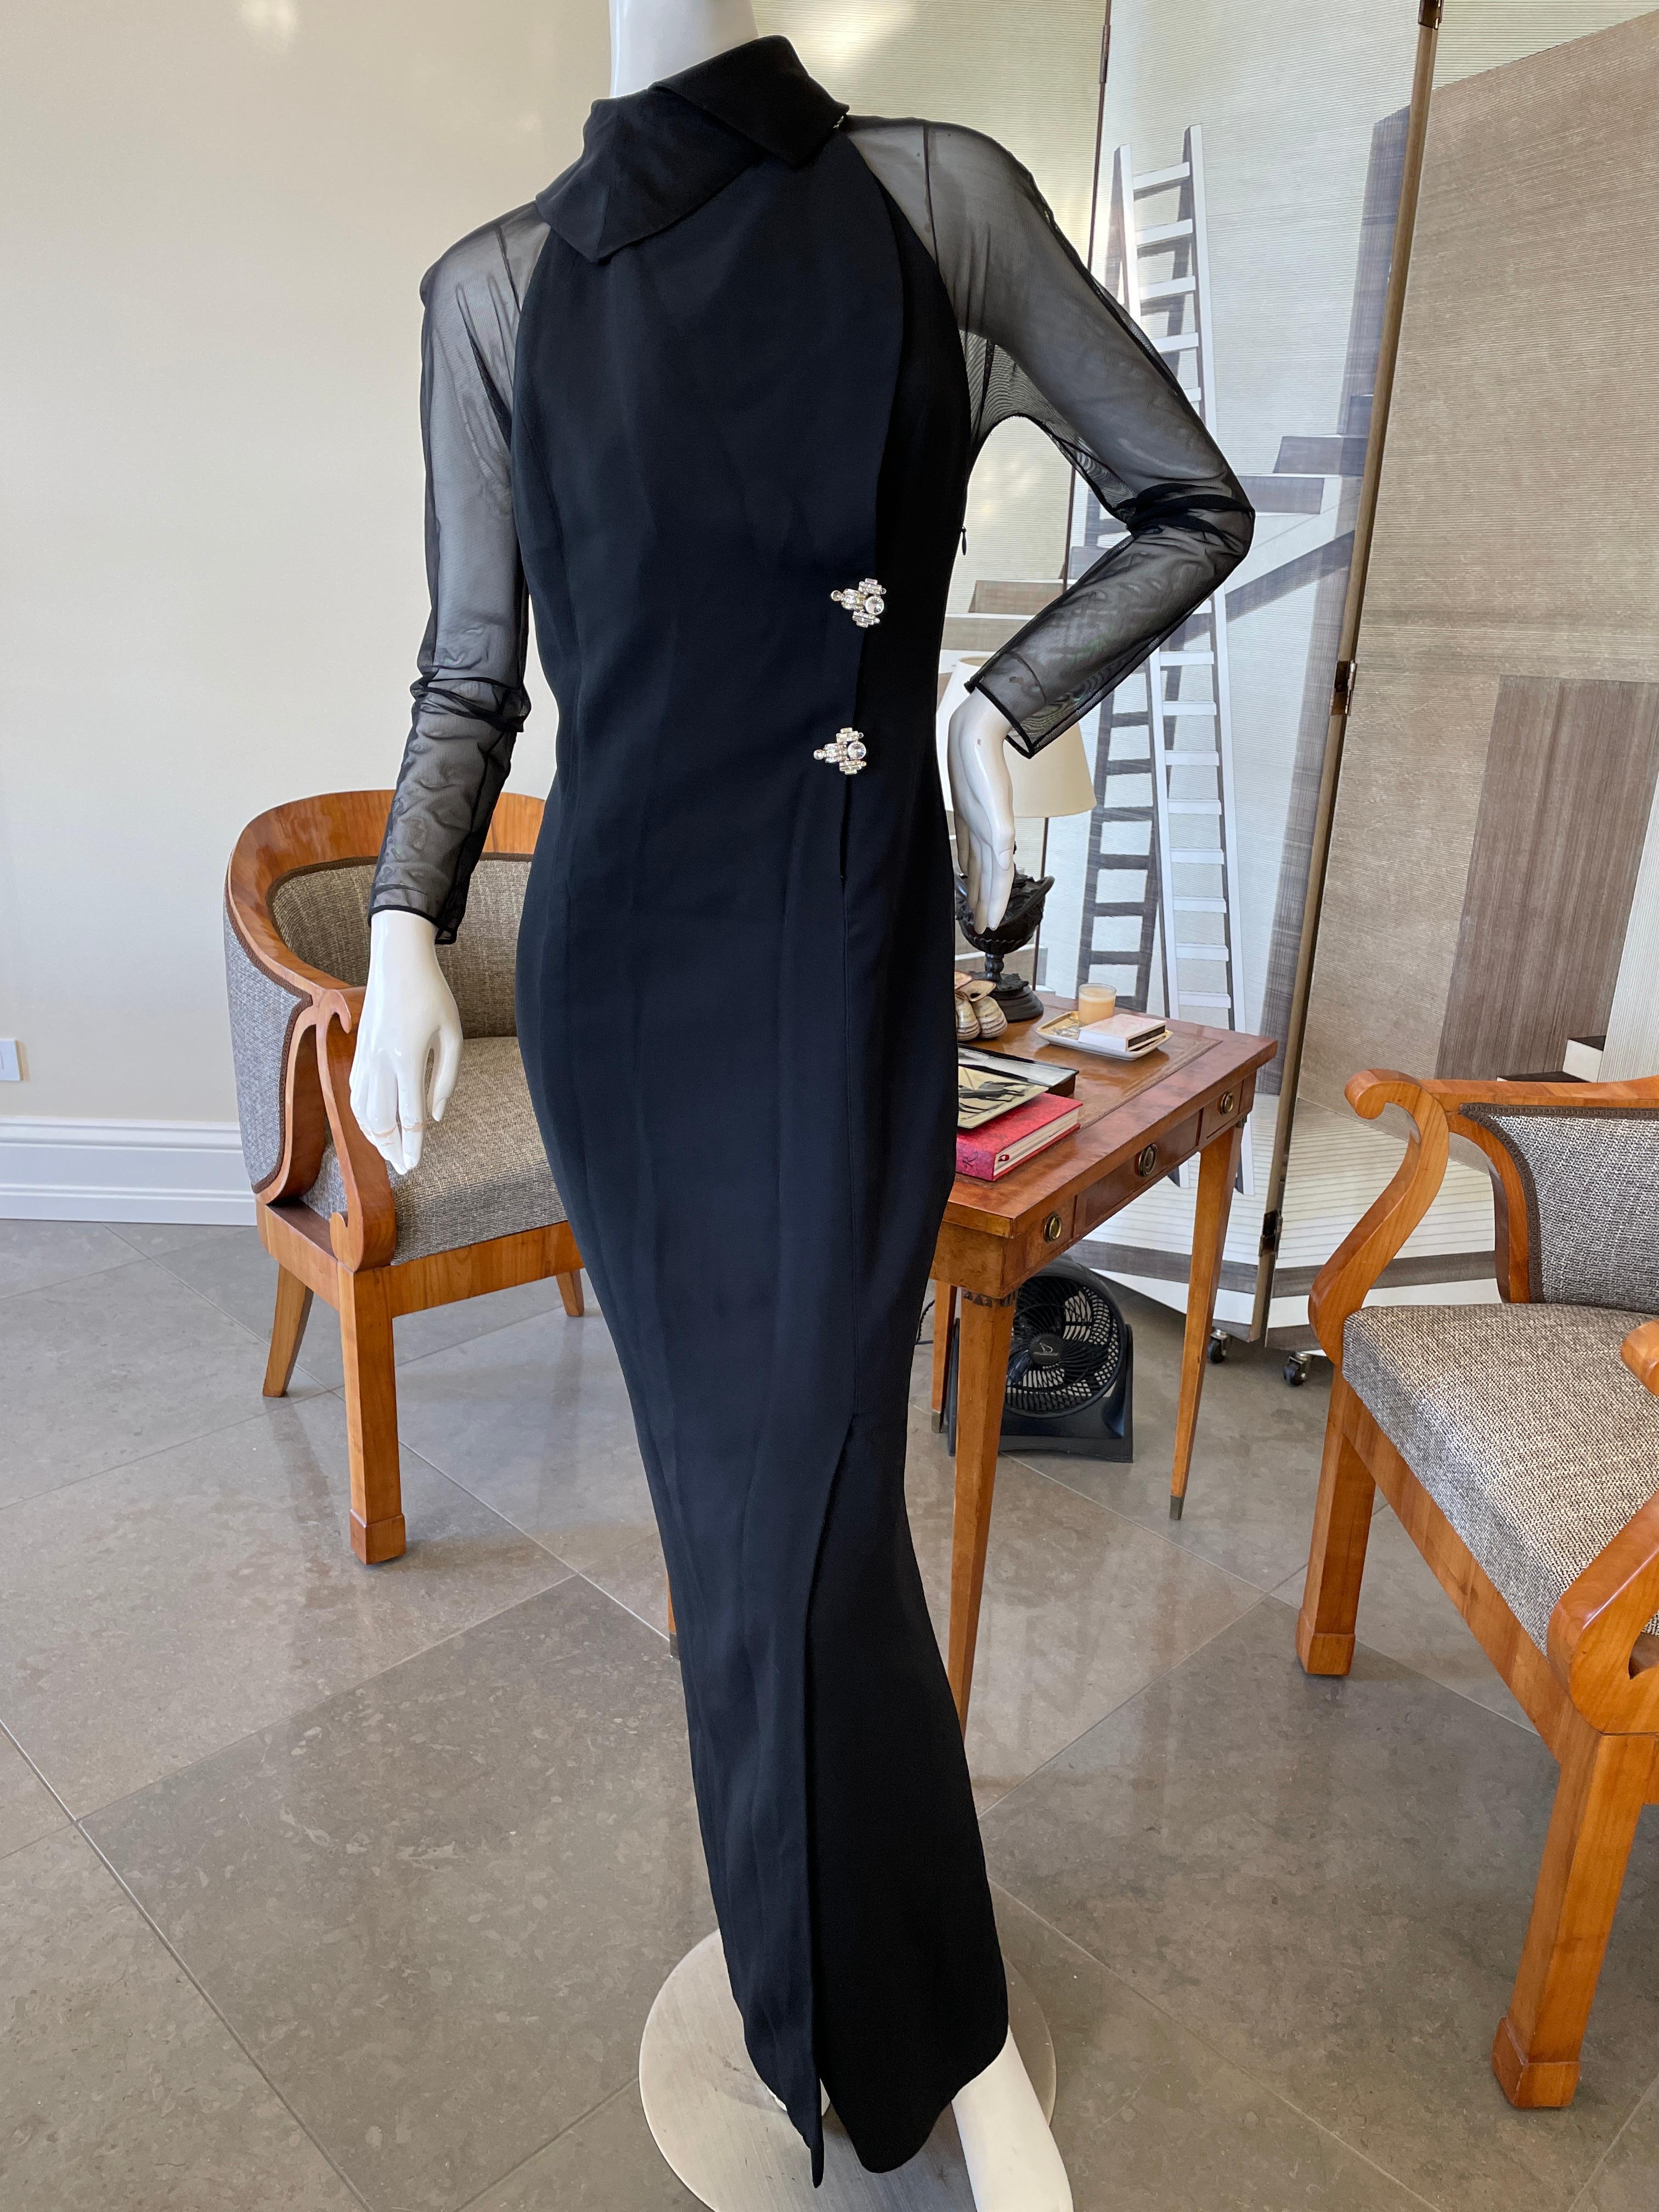  Gianfranco Ferre Vintage Sheer Black Evening Dress with Sexy Back For Sale 2